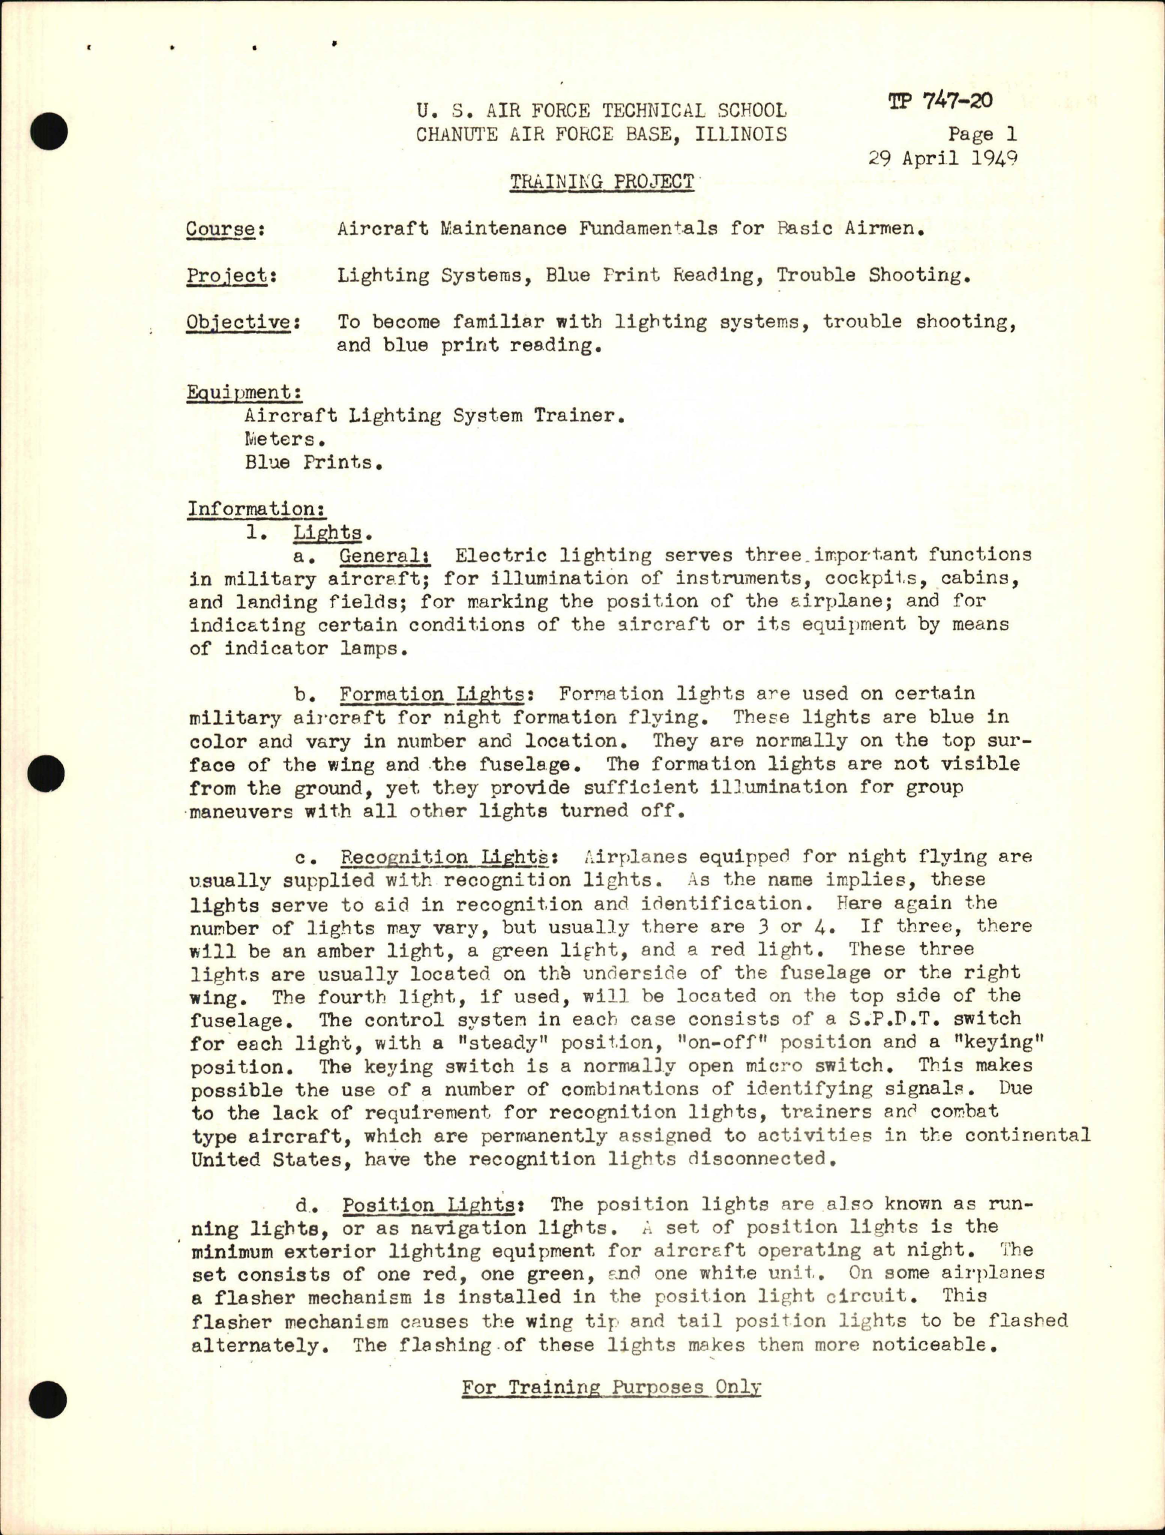 Sample page 1 from AirCorps Library document: Training Project, Lighting Systems, Blue Print Reading, Trouble Shooting